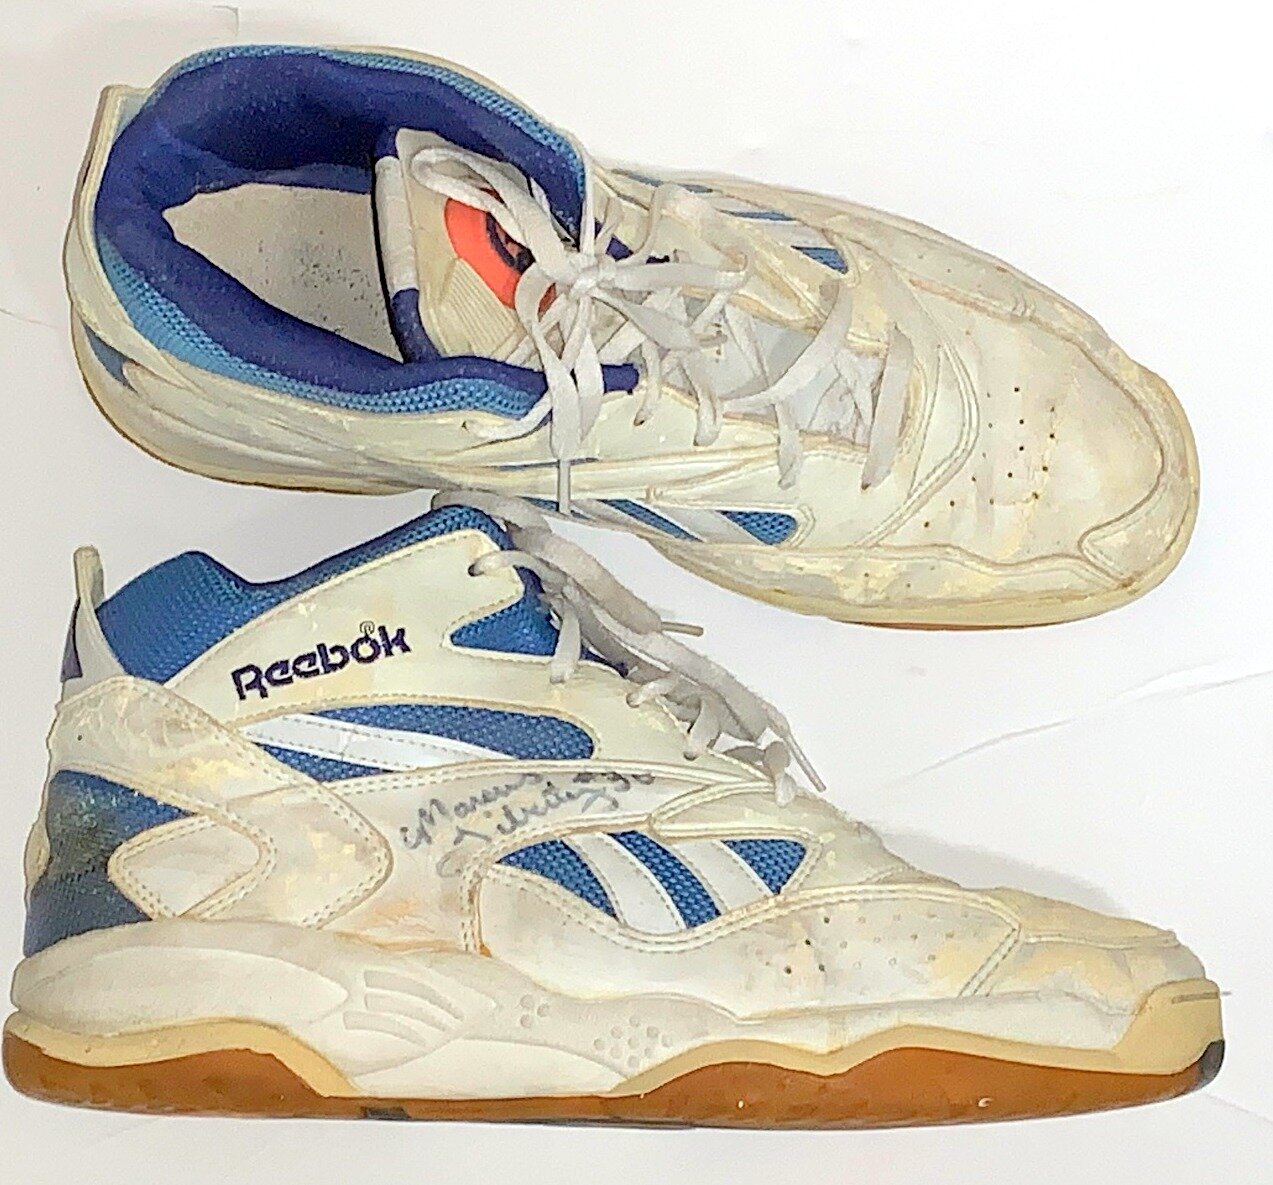 Bleachers Sports & Framing — Liberty Signed Used Pair Reebok Pumps Size 13 Shoes